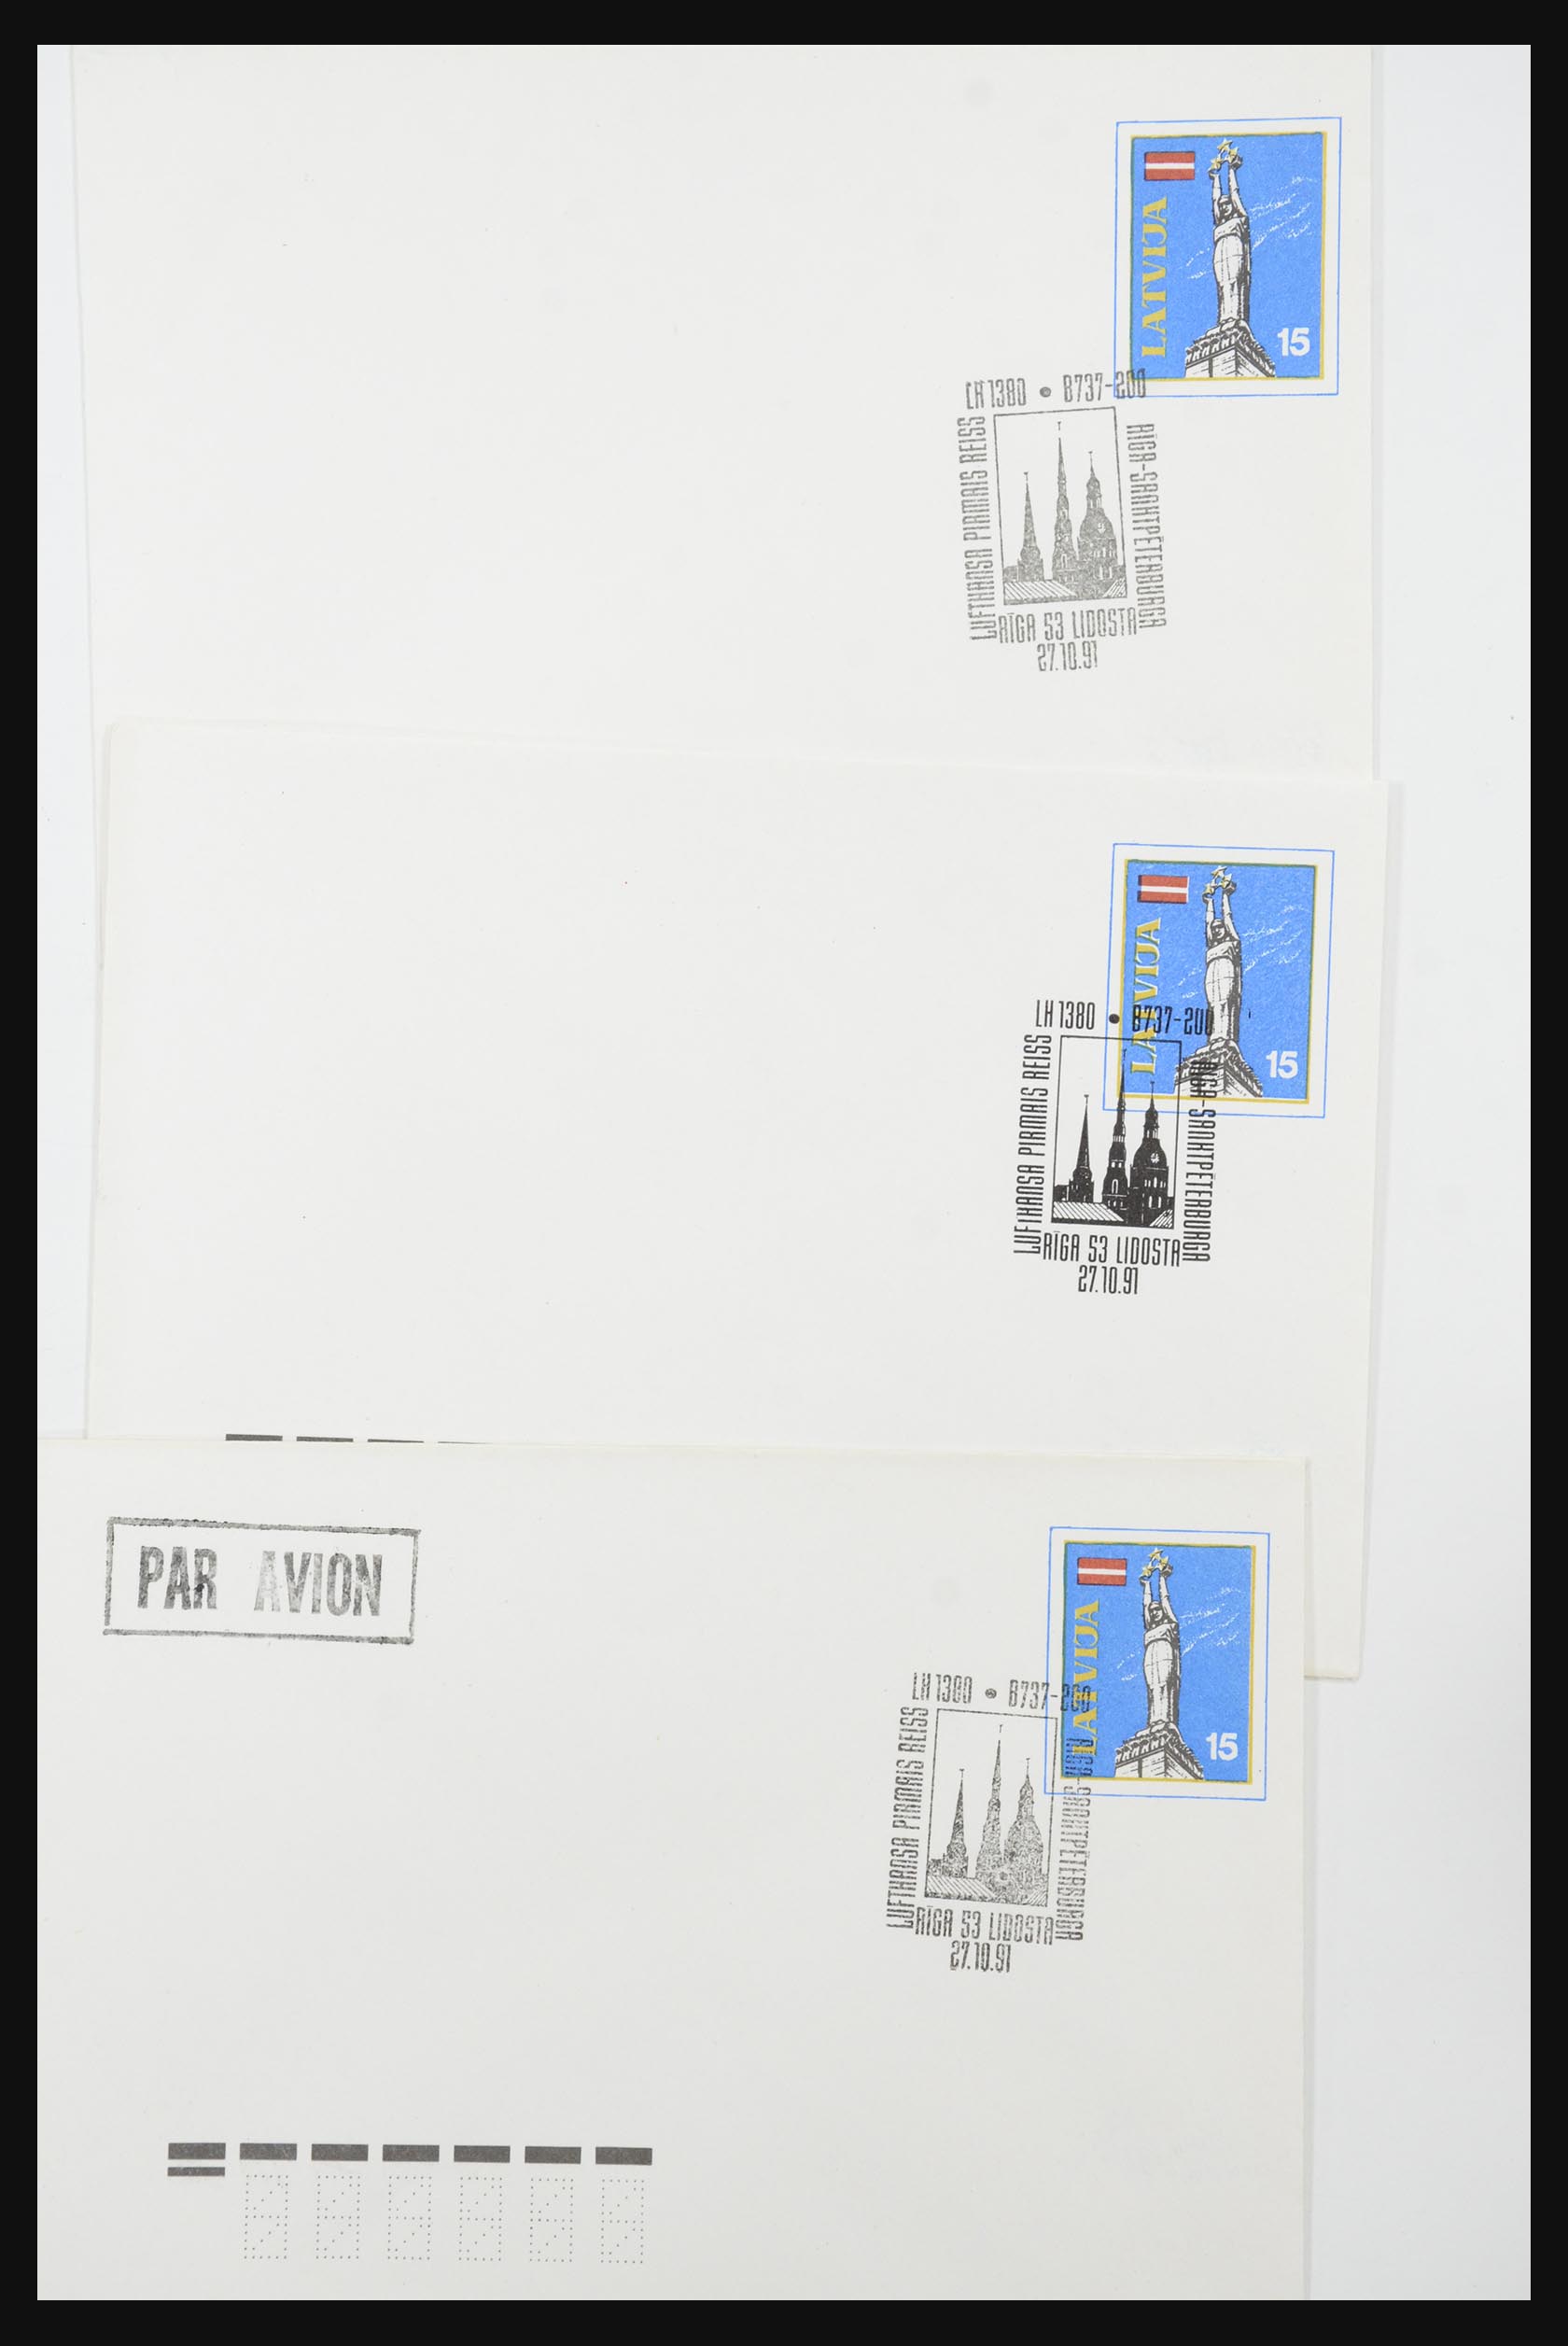 31584 055 - 31584 Latvia covers/FDC's and postal stationeries 1990-1992.